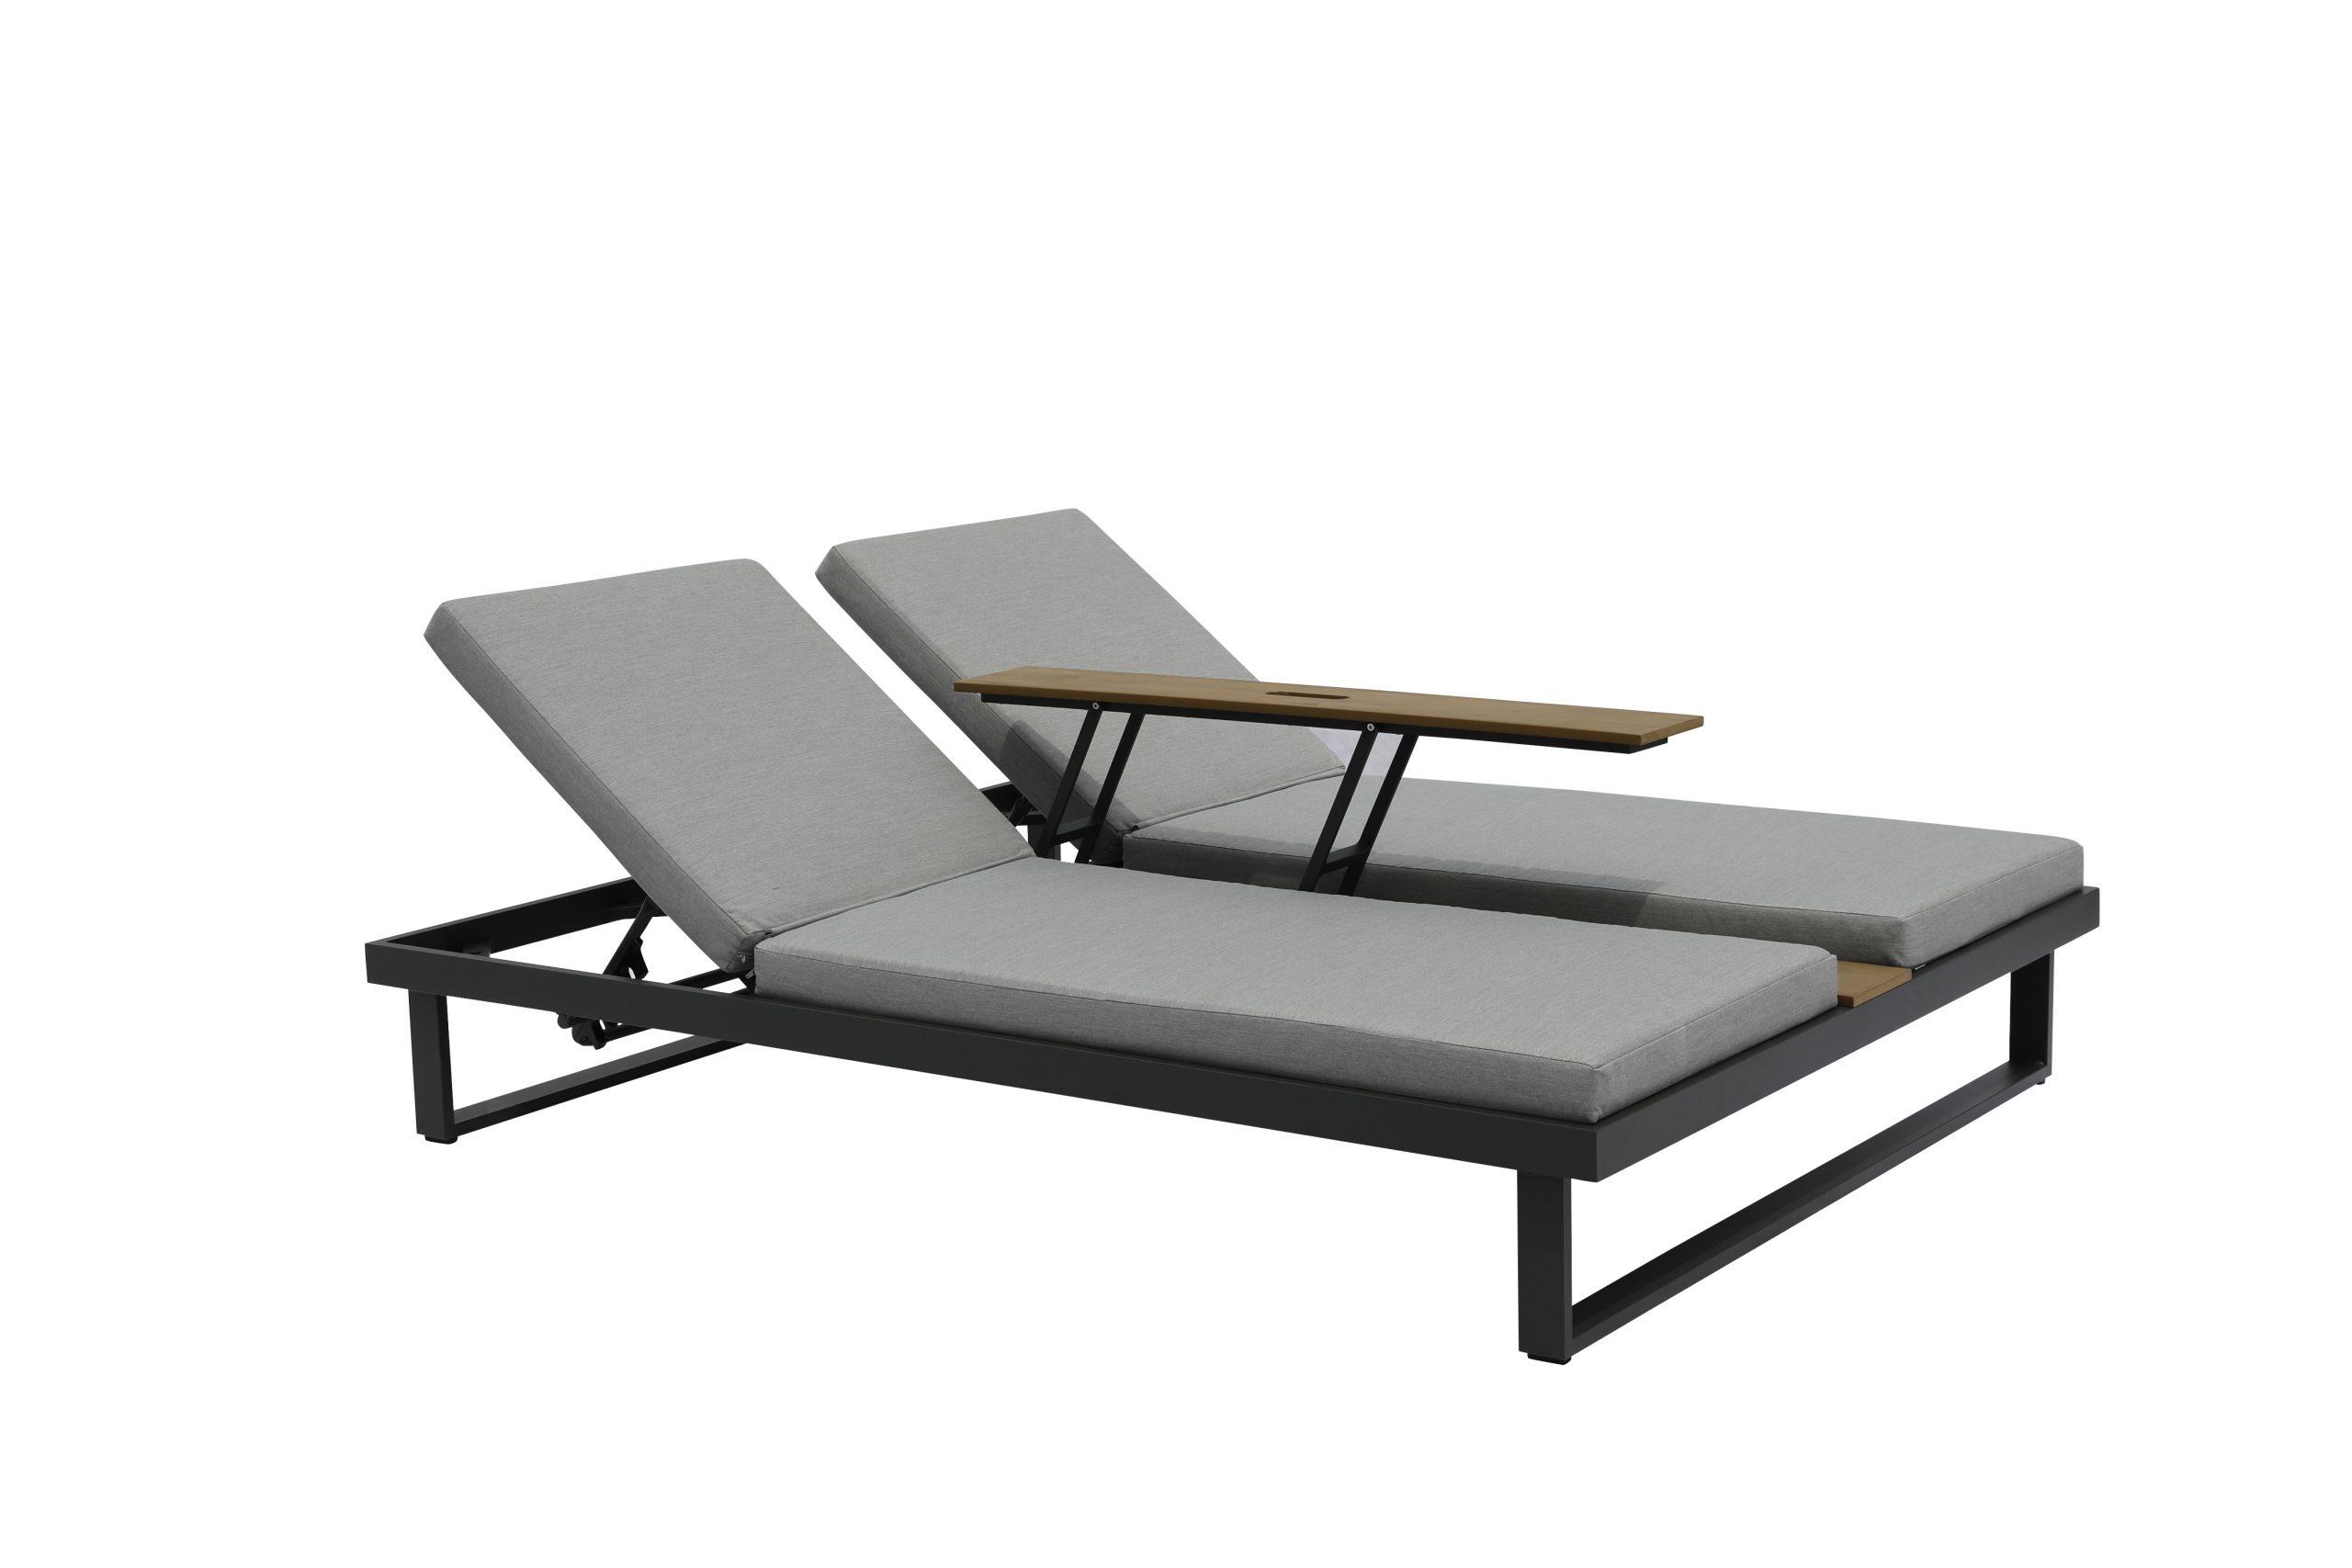 Modern Double Lounge Chair CL1572-GRY Sandy CL1572-GRY in Gray Fabric